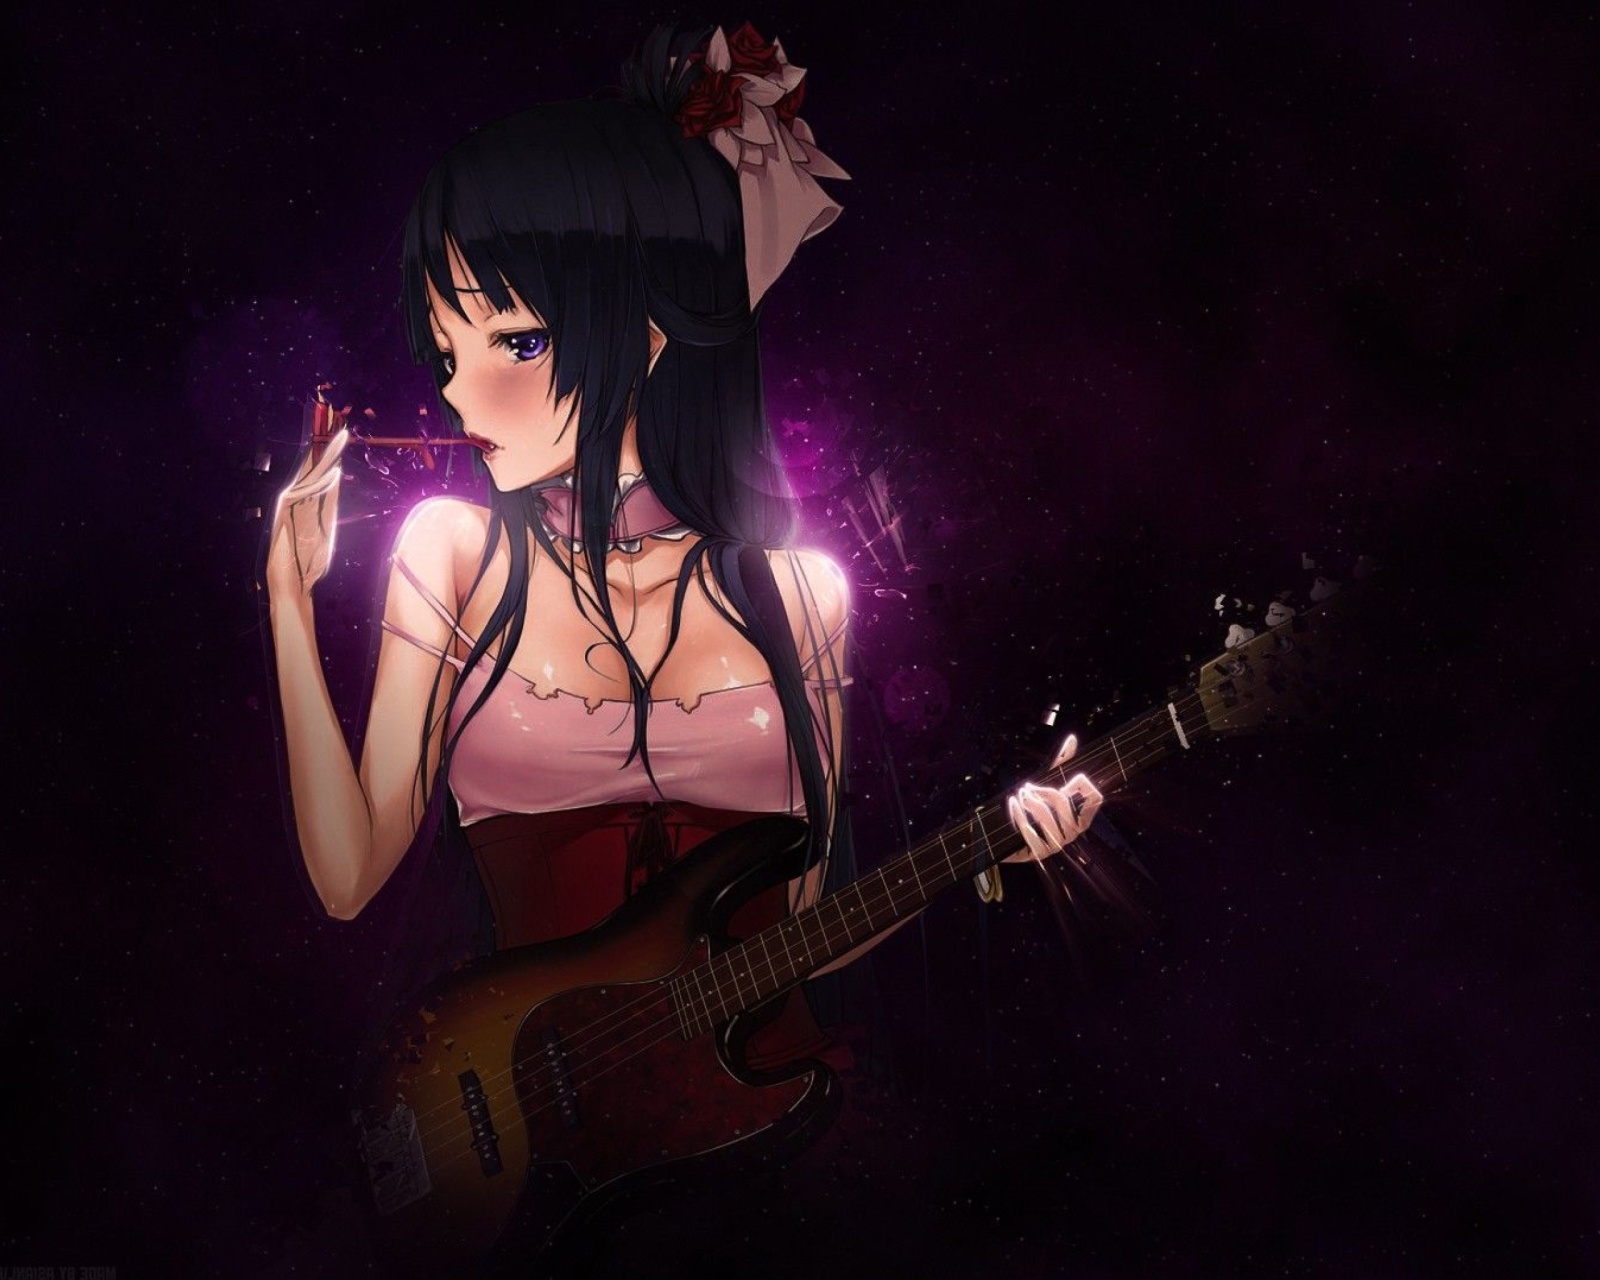 Anime Girl with Guitar wallpaper 1600x1280